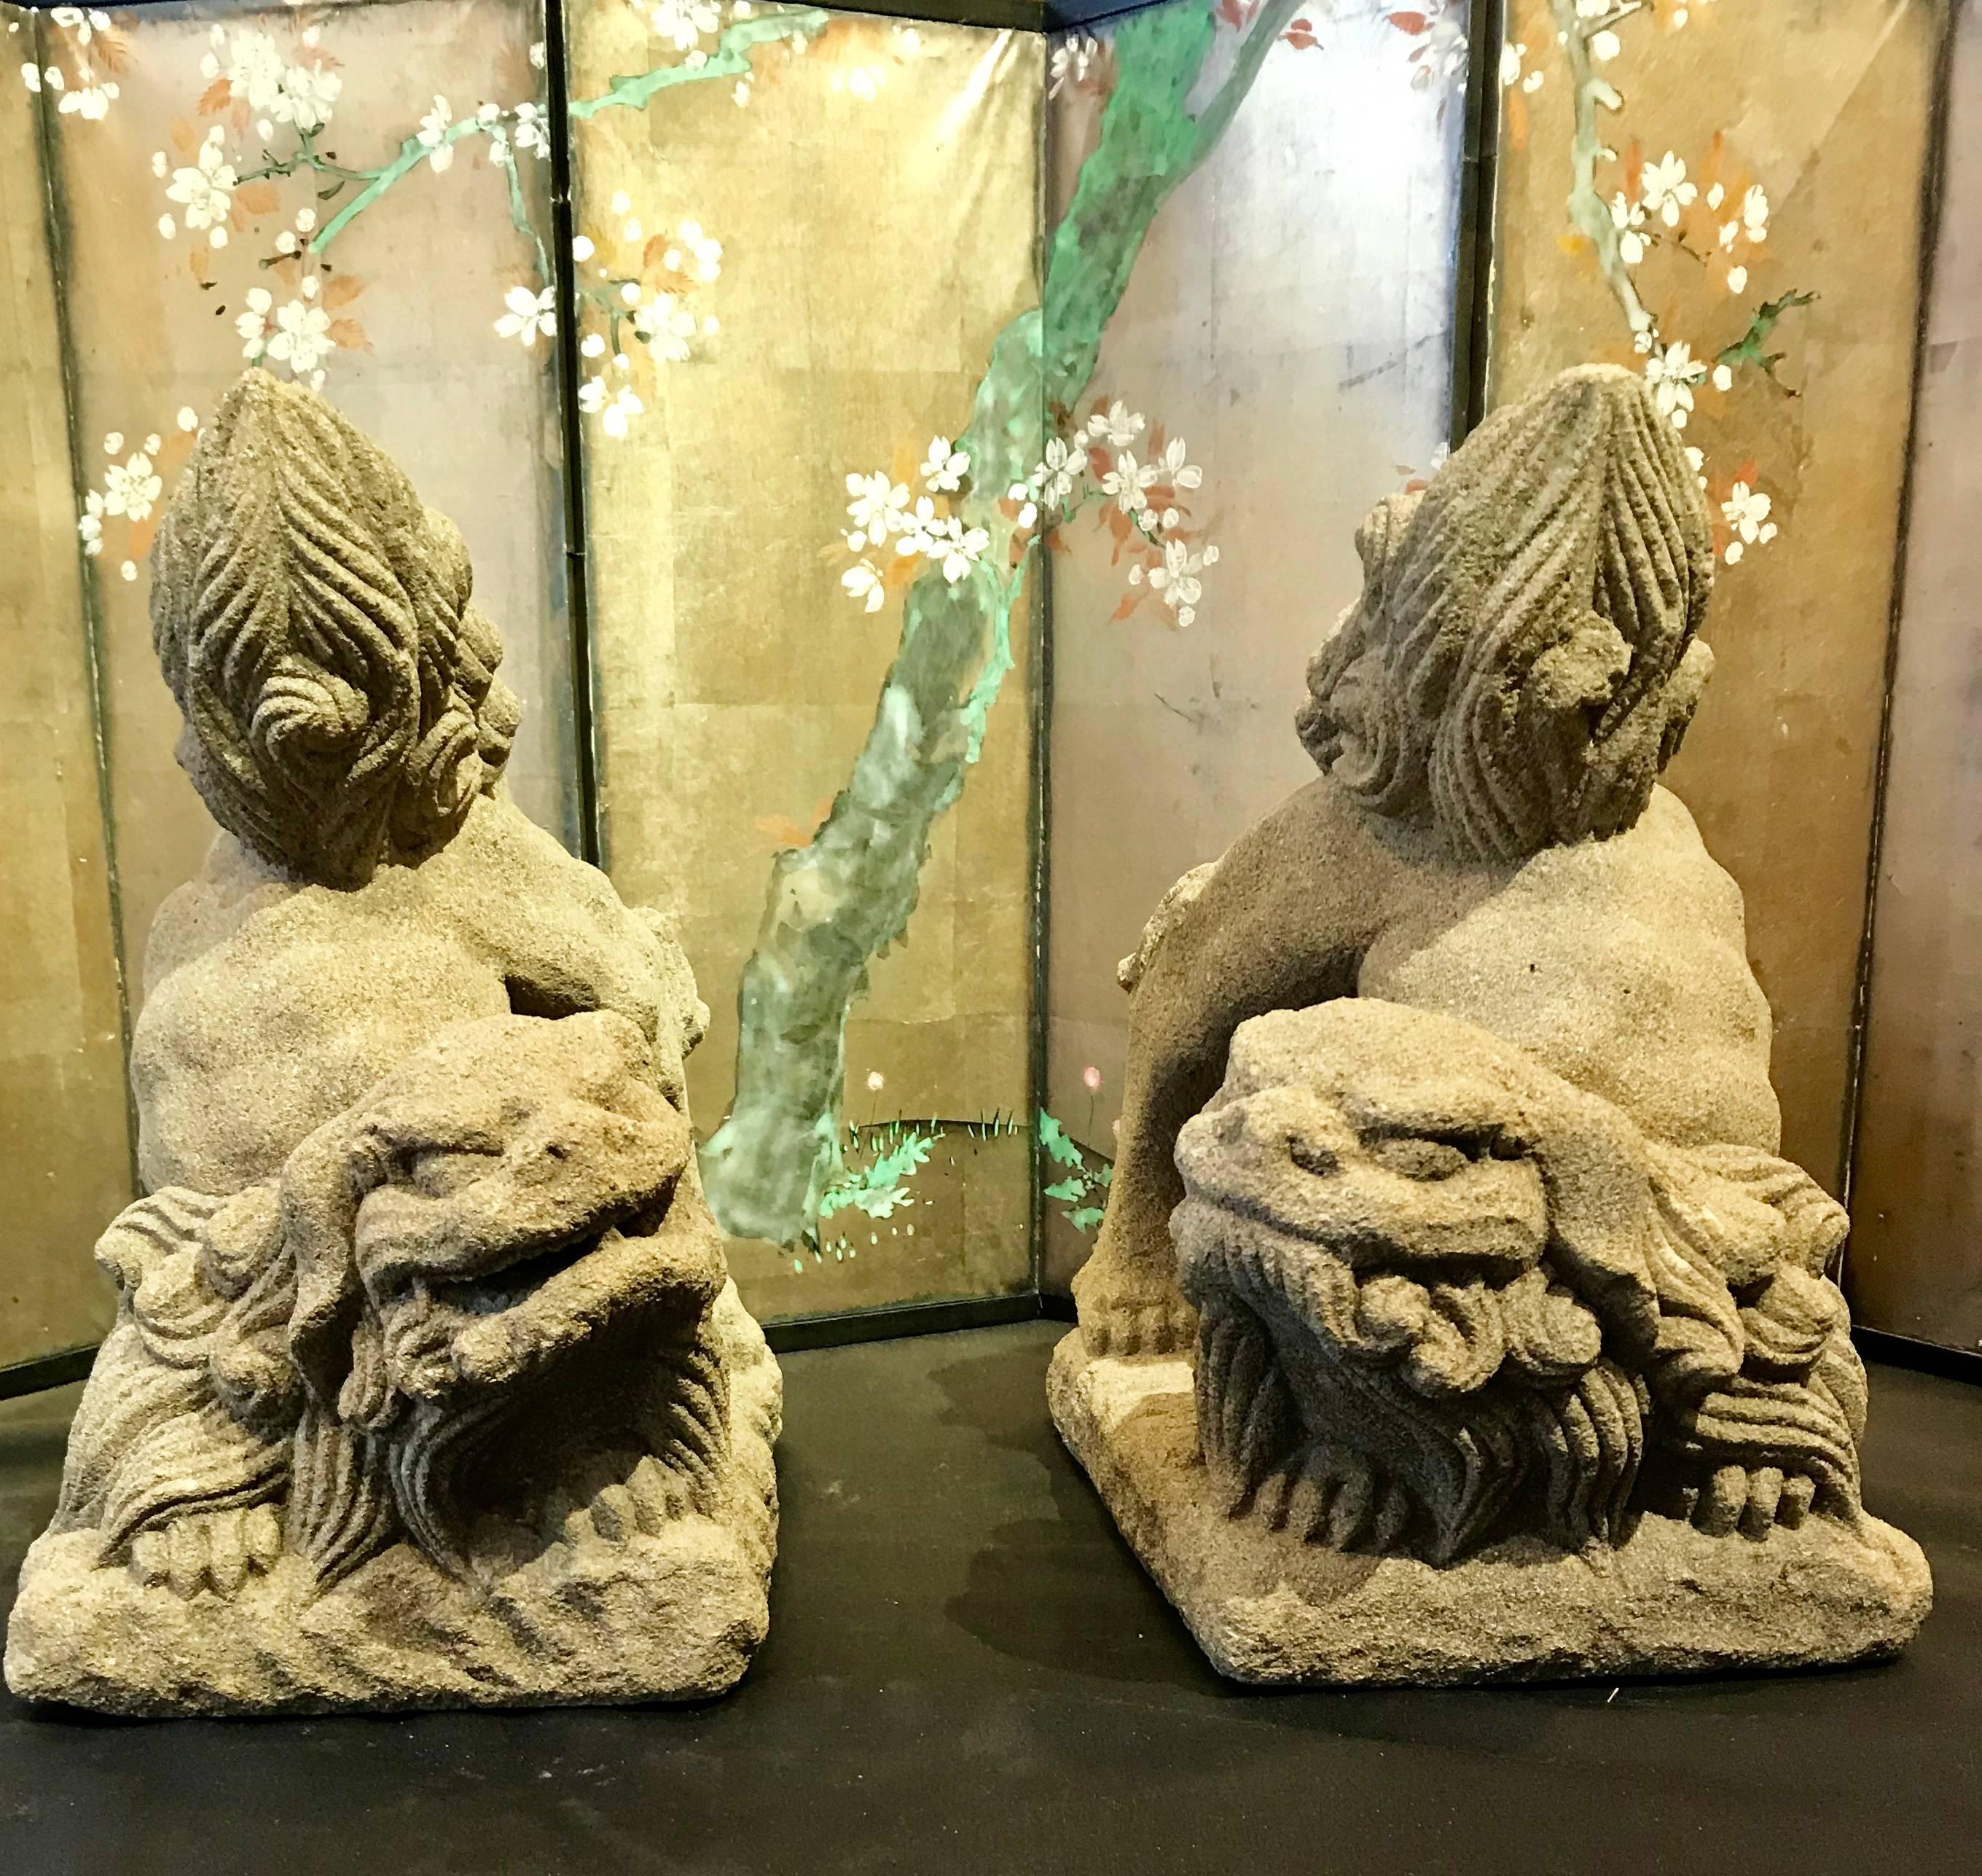 Japan fine pair old Edo mid-19th century period hand carved sand stone Yokohama Komainu Lion-dog temple guardians. 

Excellent condition. 

Dimensions: 13 inches high.

Hand carved sand stone, convenient portable size. Hard to find.

Only one pair